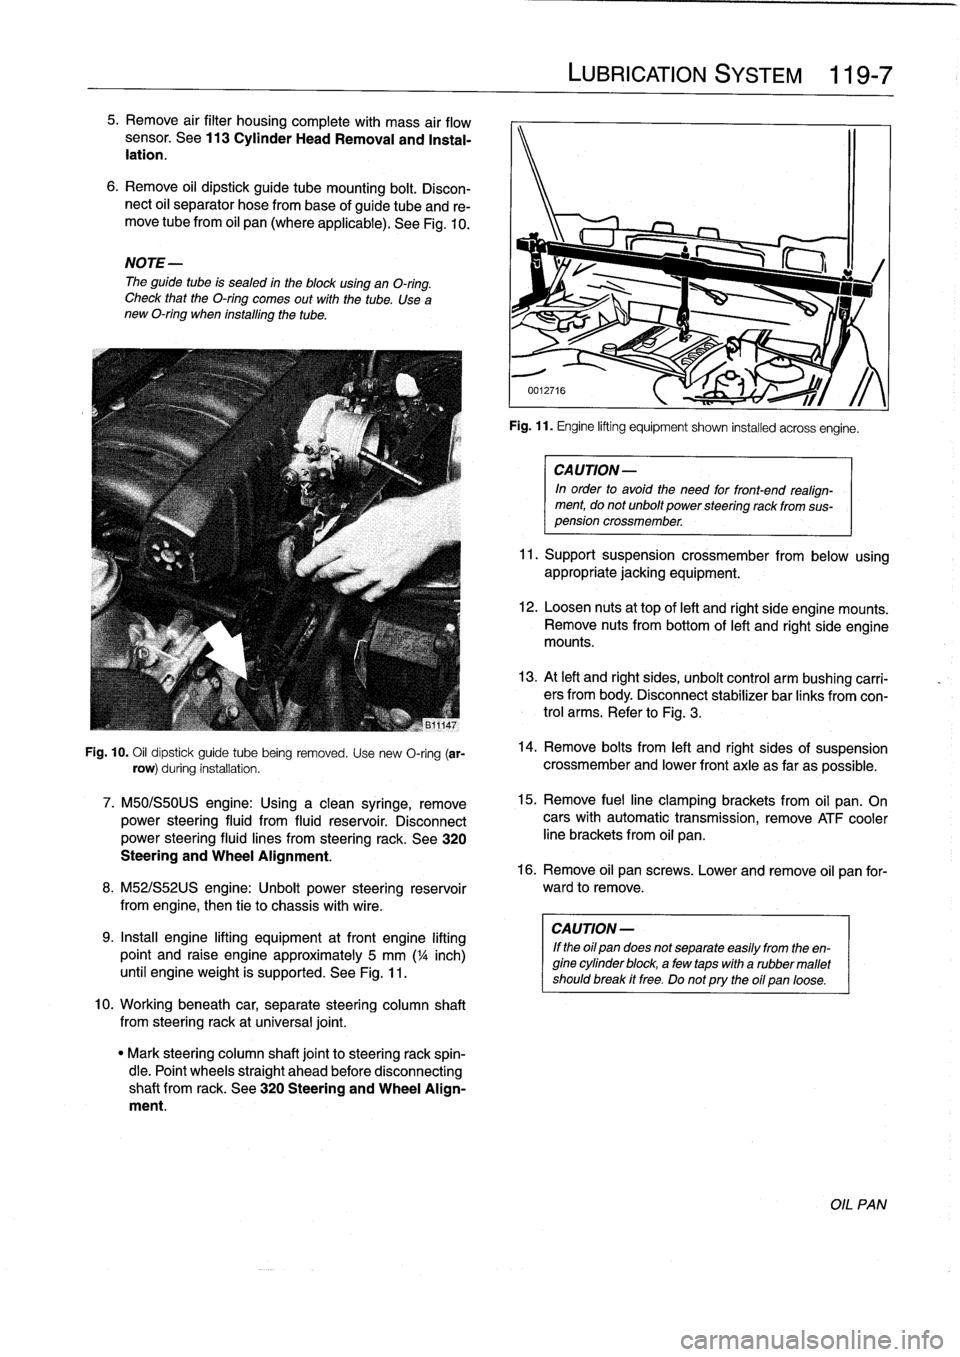 BMW 323i 1992 E36 Workshop Manual 
5
.
Remove
air
filter
housingcomplete
with
mass
air
flow
sensor
.
See113
Cylinder
HeadRemoval
and
Instal-
lation
.

6
.
Remove
oil
dipstick
guide
tube
mounting
bolt
.
Discon-
nect
oil
separator
hose
